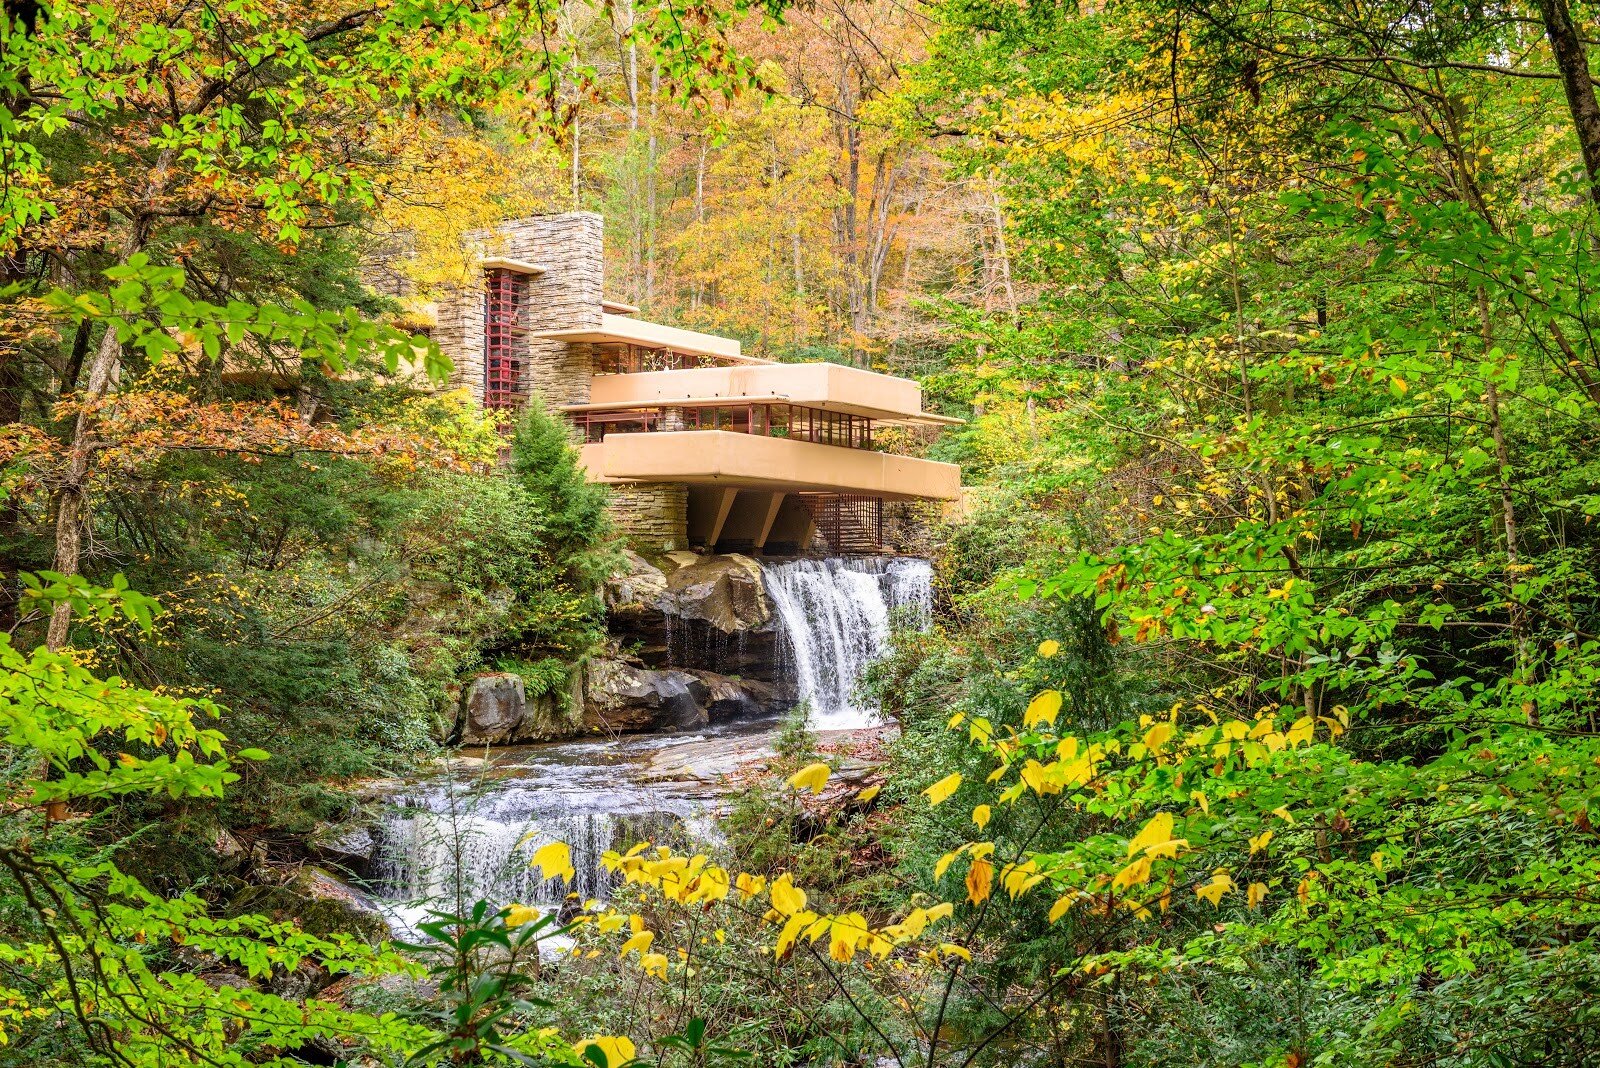 The tiered levels in Wright’s Fallingwater in Pennsylvania integrate with the dropping waterfall.